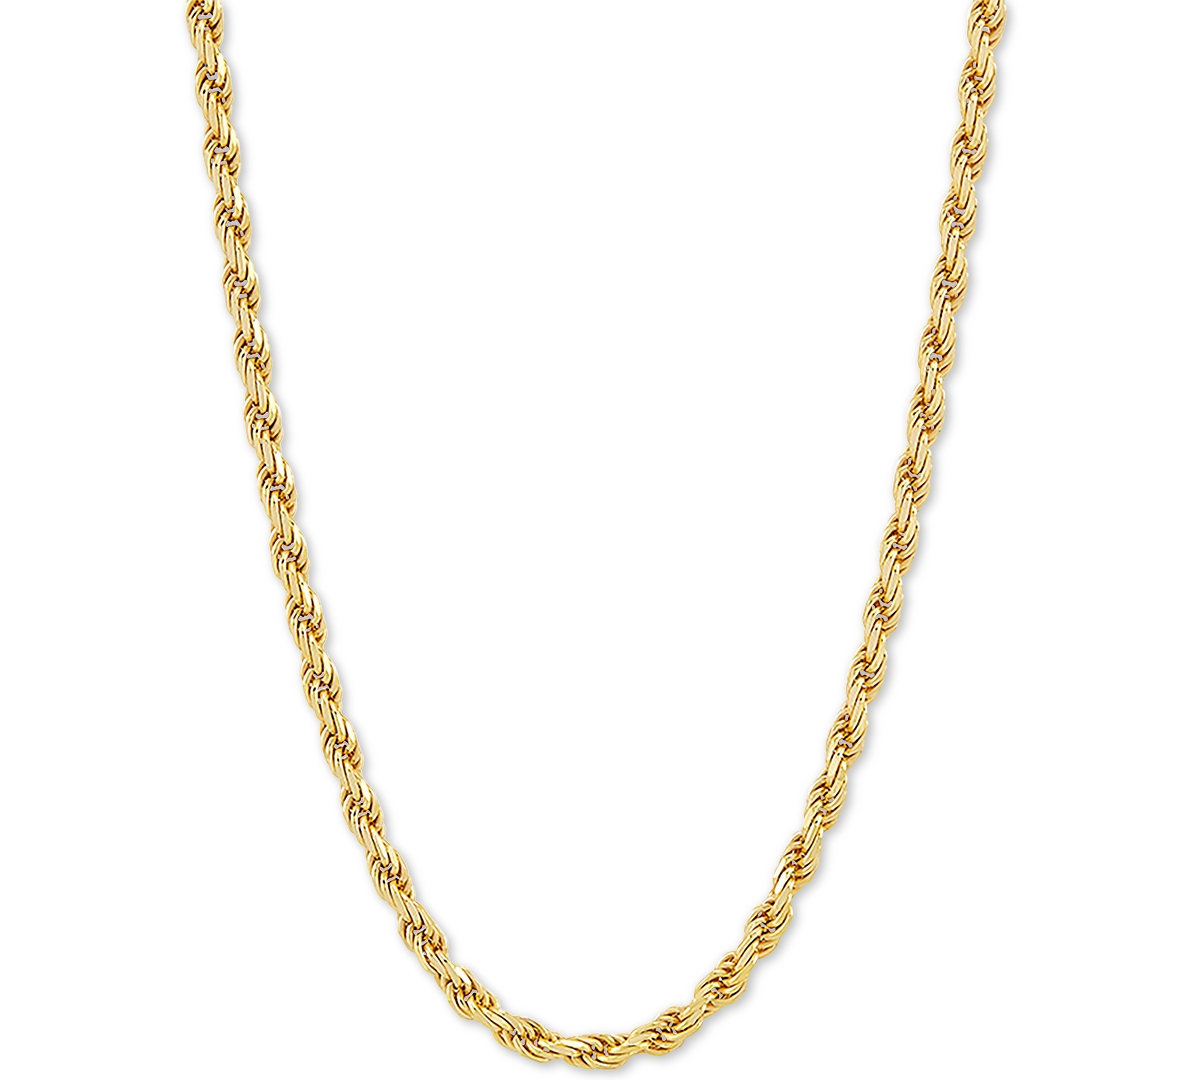 Rope Link 18" Chain Necklace in 18k Gold-Plated Sterling Silver - Gold Over Silver